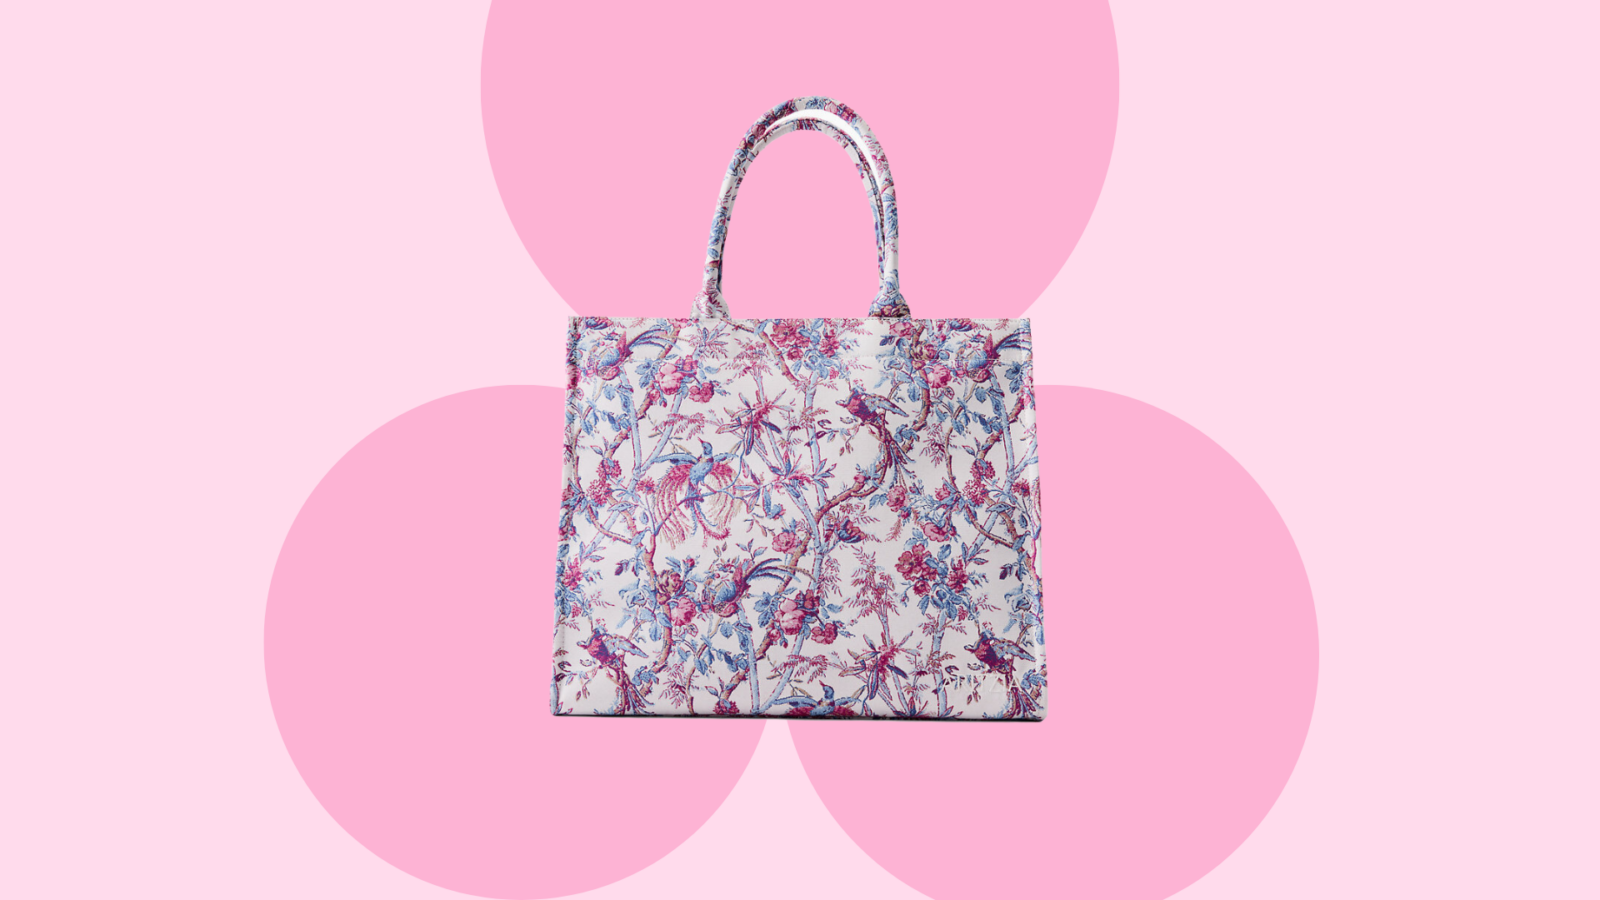 These Aritzia tote bags are going viral on TikTok - View the VIBE Toronto